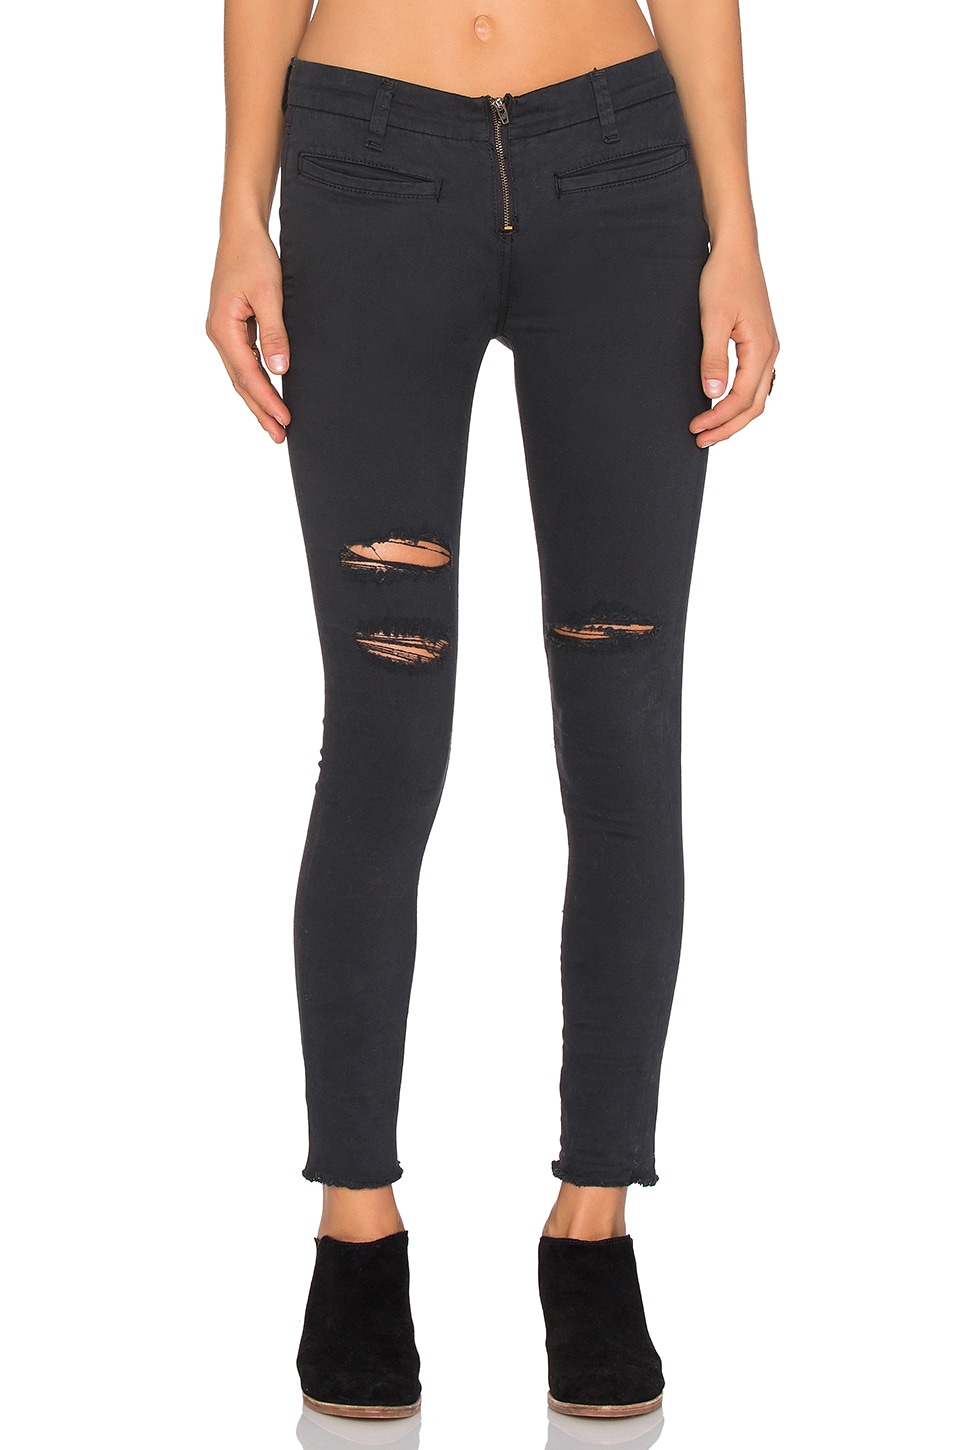 Amuse Society Womens Iconic Skinny Jeans Charcoal